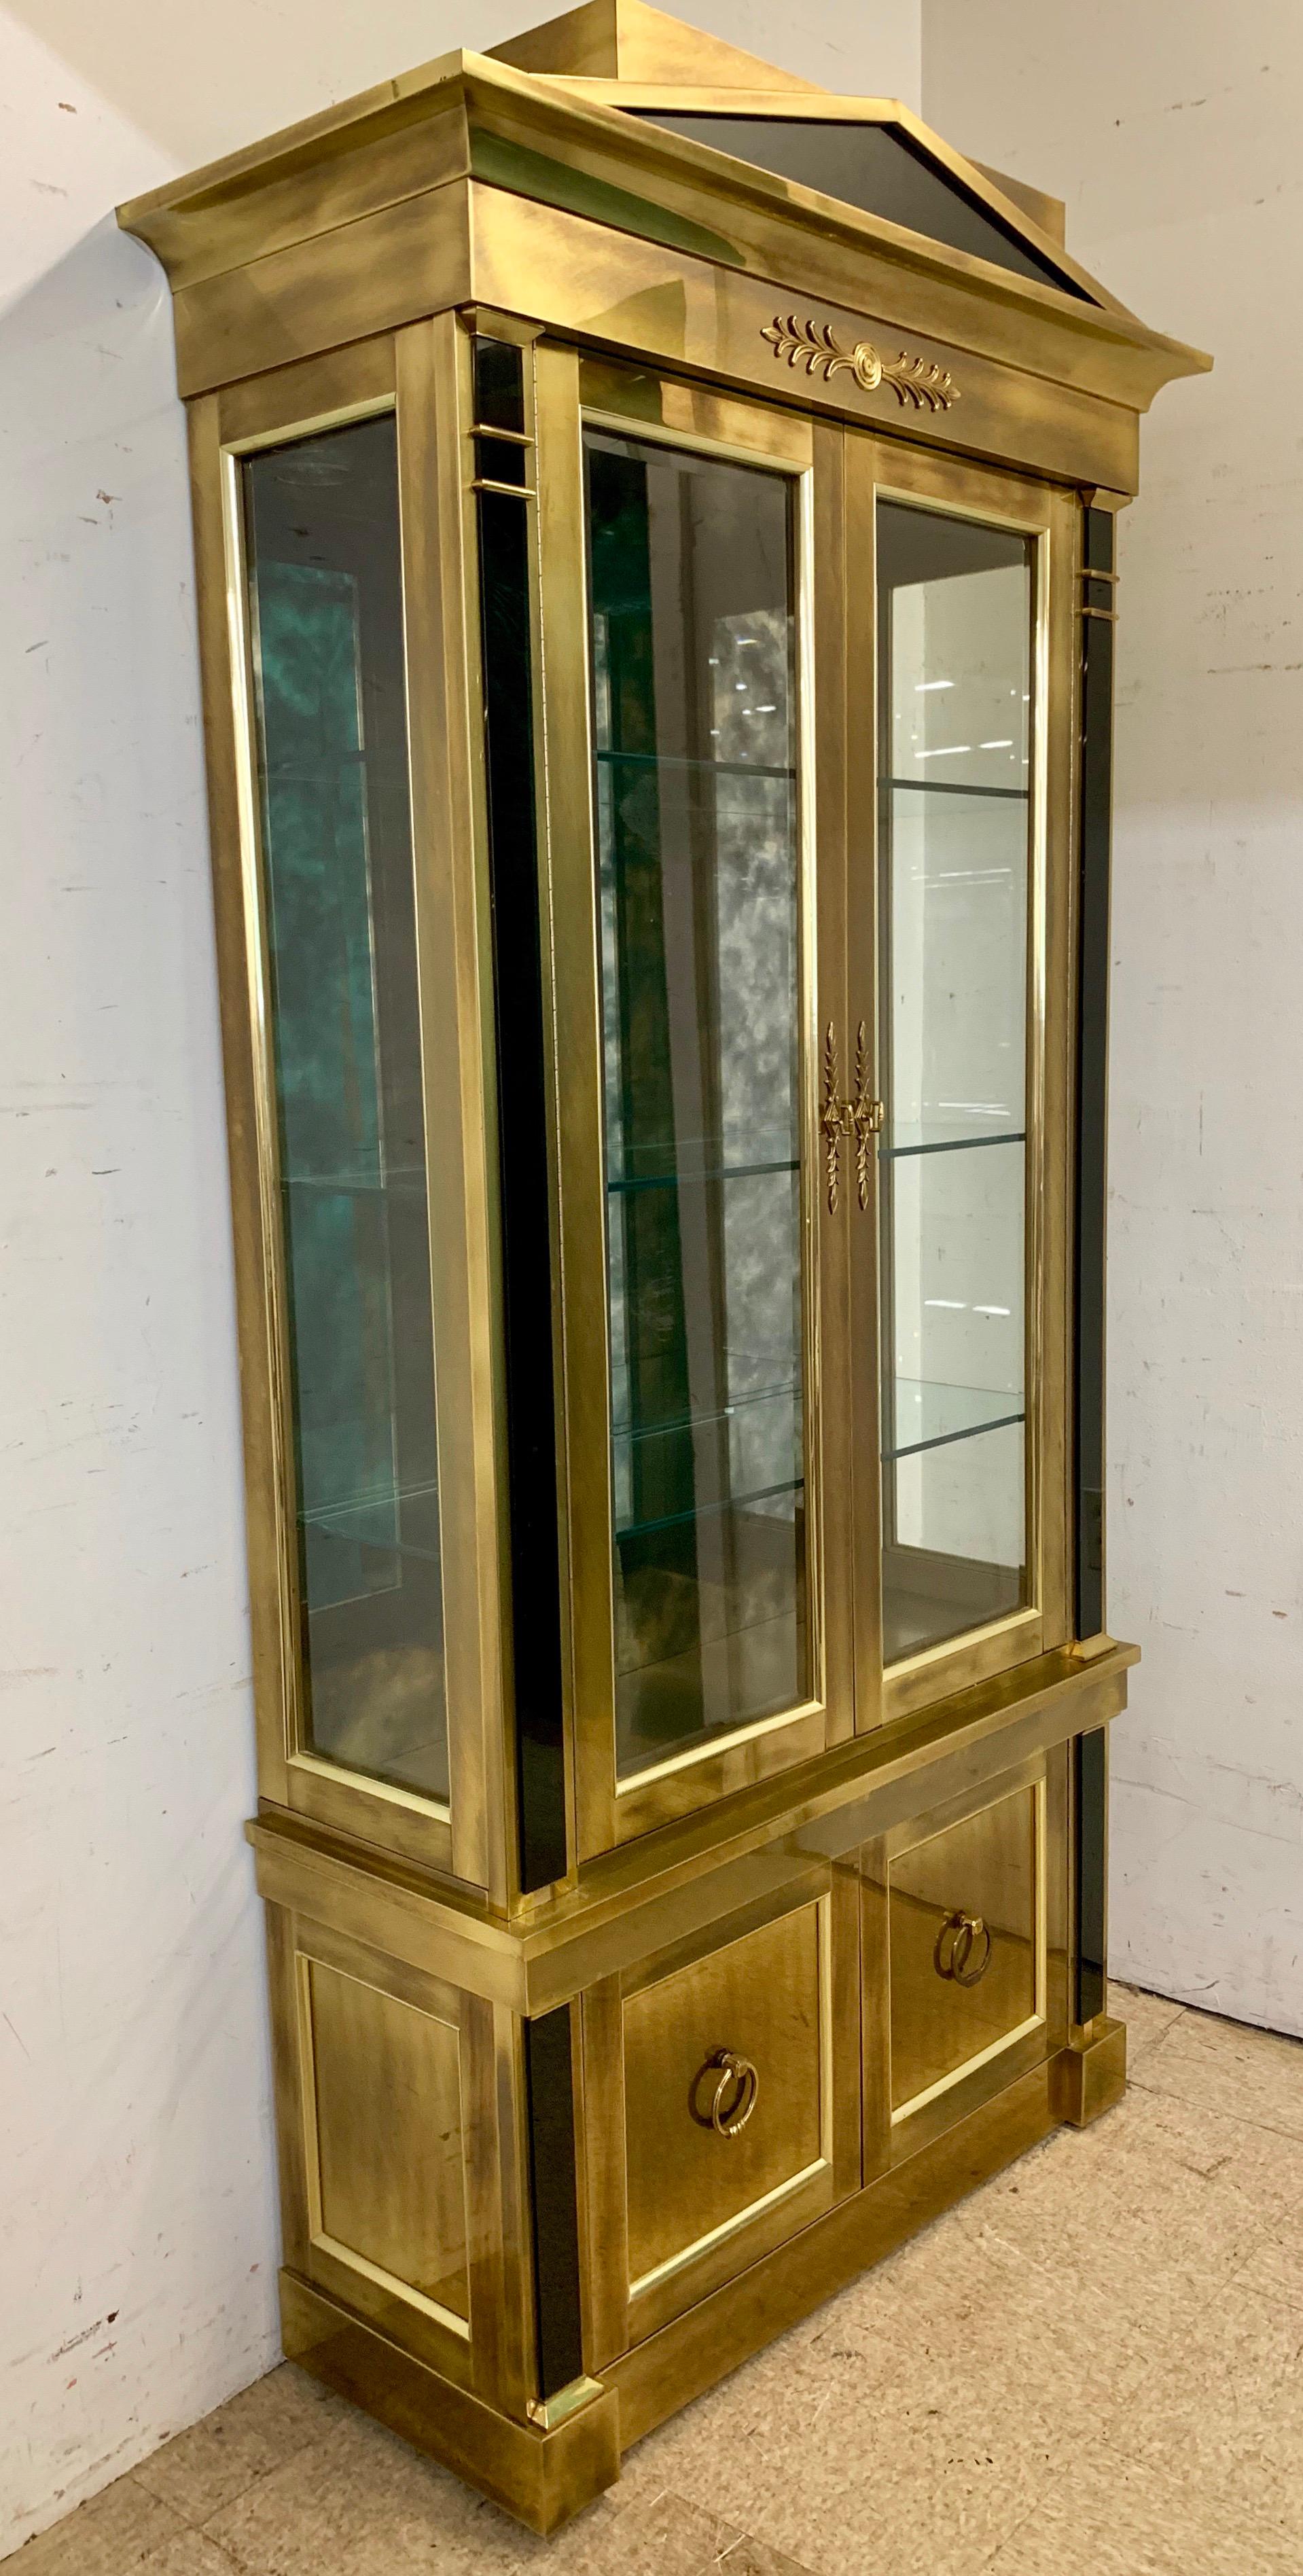 Stunning Mastercraft display cabinet made of brass with black glass accents. Glass doors open to glass shelves with mirrored background and is lighted from above. Bottom brass doors open to more storage. Top pediment and architectural detail give it